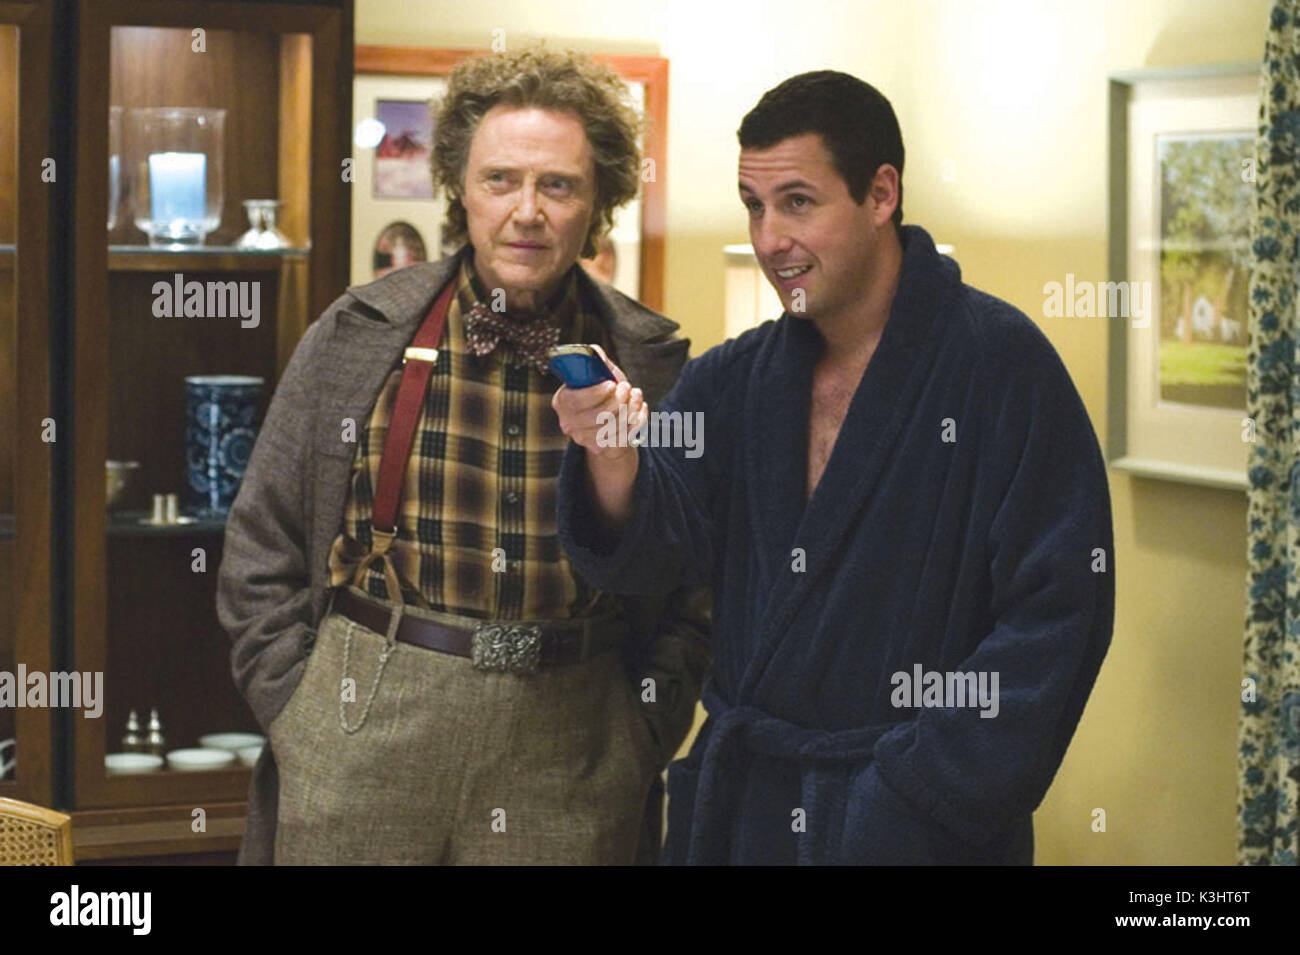 Christopher Walken and Adam Sandler star in Revolution Studios' comedy Click, a Columbia Pictures release. Photo Credit: Tracy Bennett Copyright: (c) 2006 Revolution Studios Distribution Company, LLC. All rights reserved. CLICK Christopher Walken, Adam Sandler C-288 - Christopher Walken (l) and Adam Sandler star in Revolution Studios comedy Click, a Columbia Pictures release. Photo Credit: Tracy Be     Date: 2006 Stock Photo